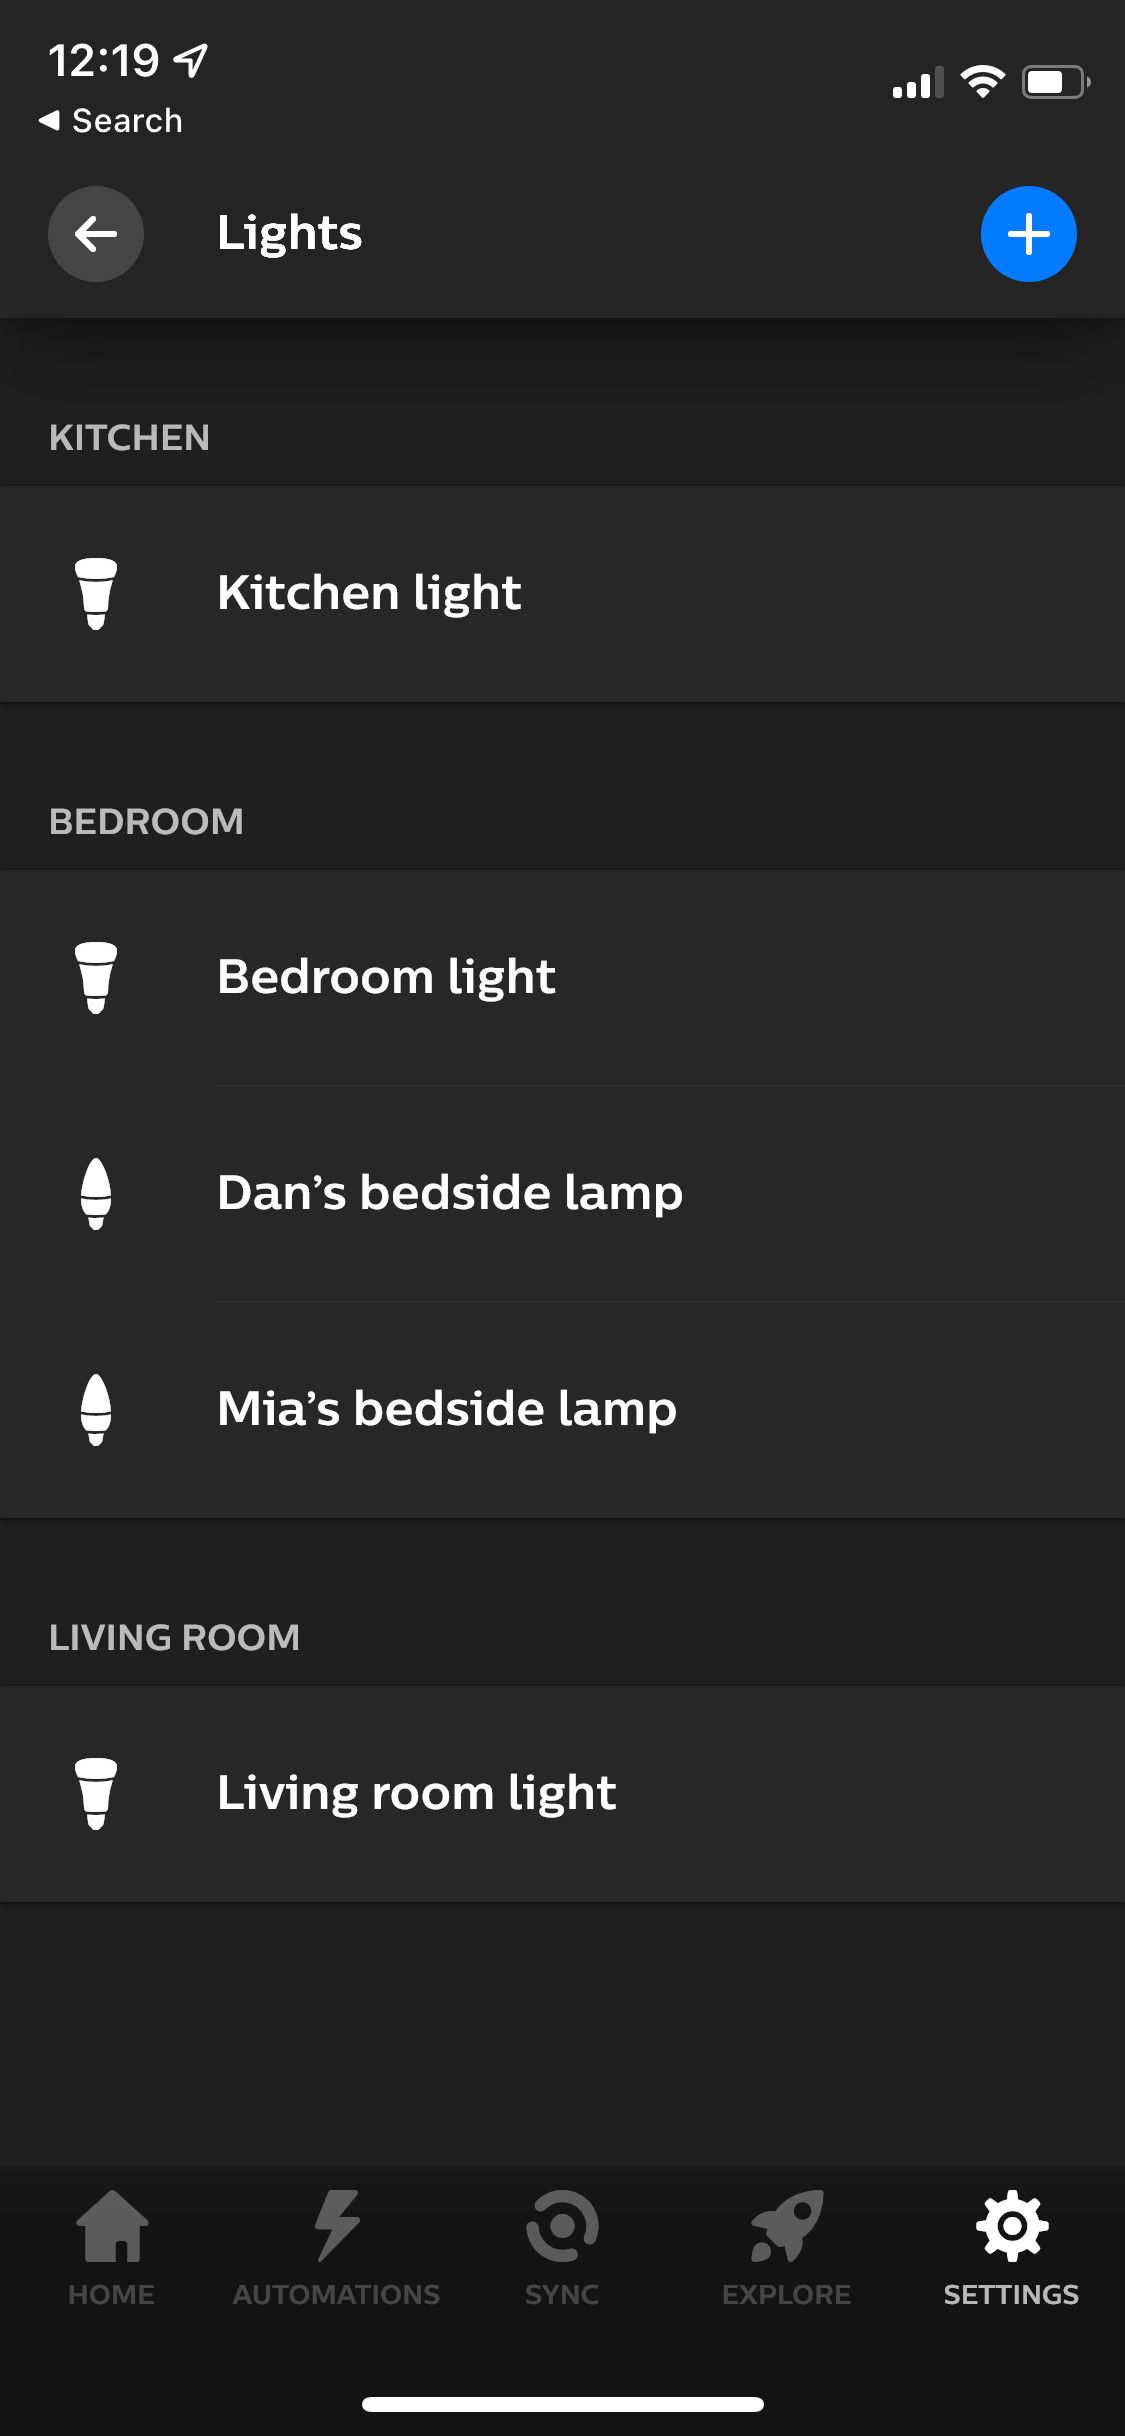 Lights page in Philips Hue app